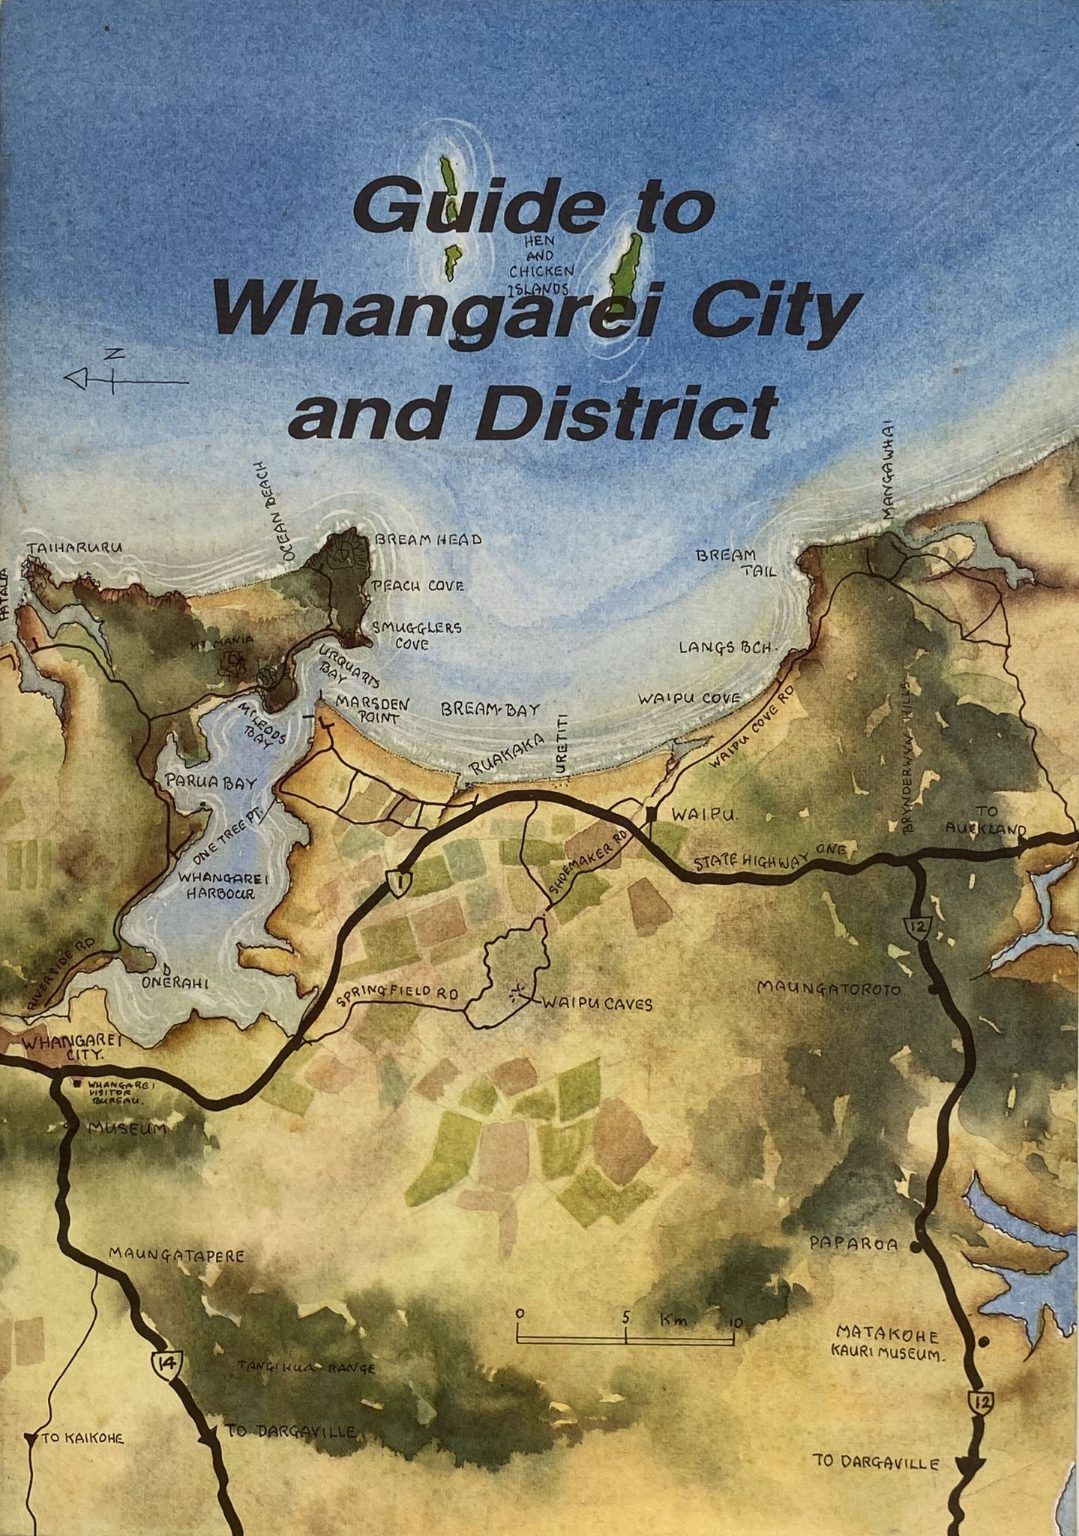 WHANGAREI: Guide to City and District